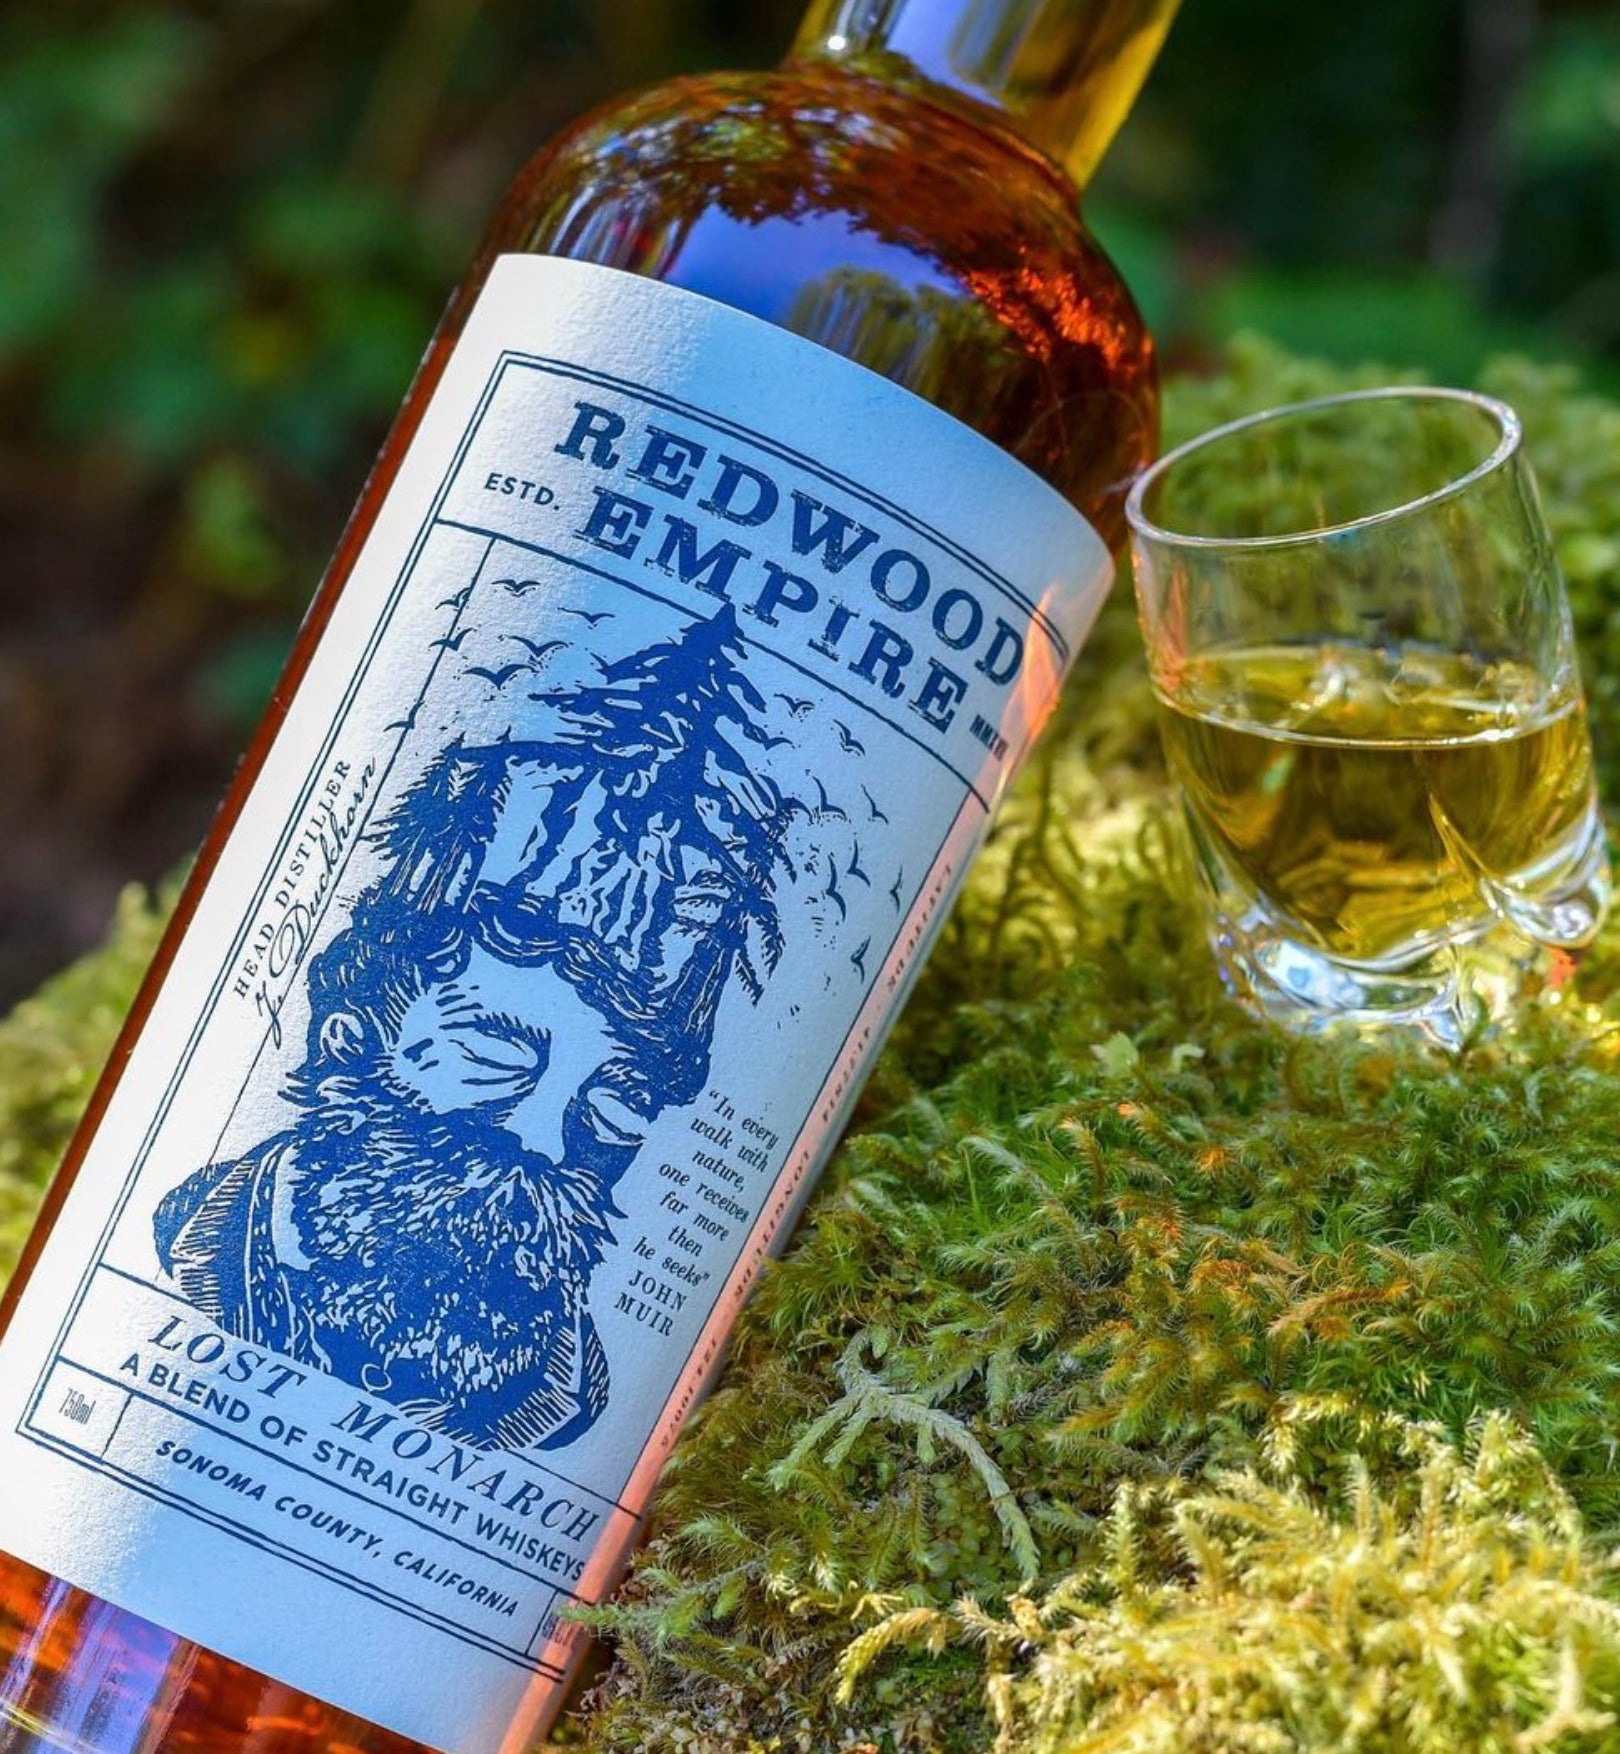 Redwood Empire Lost Monarch Sonoma County Blended Straight Whiskey